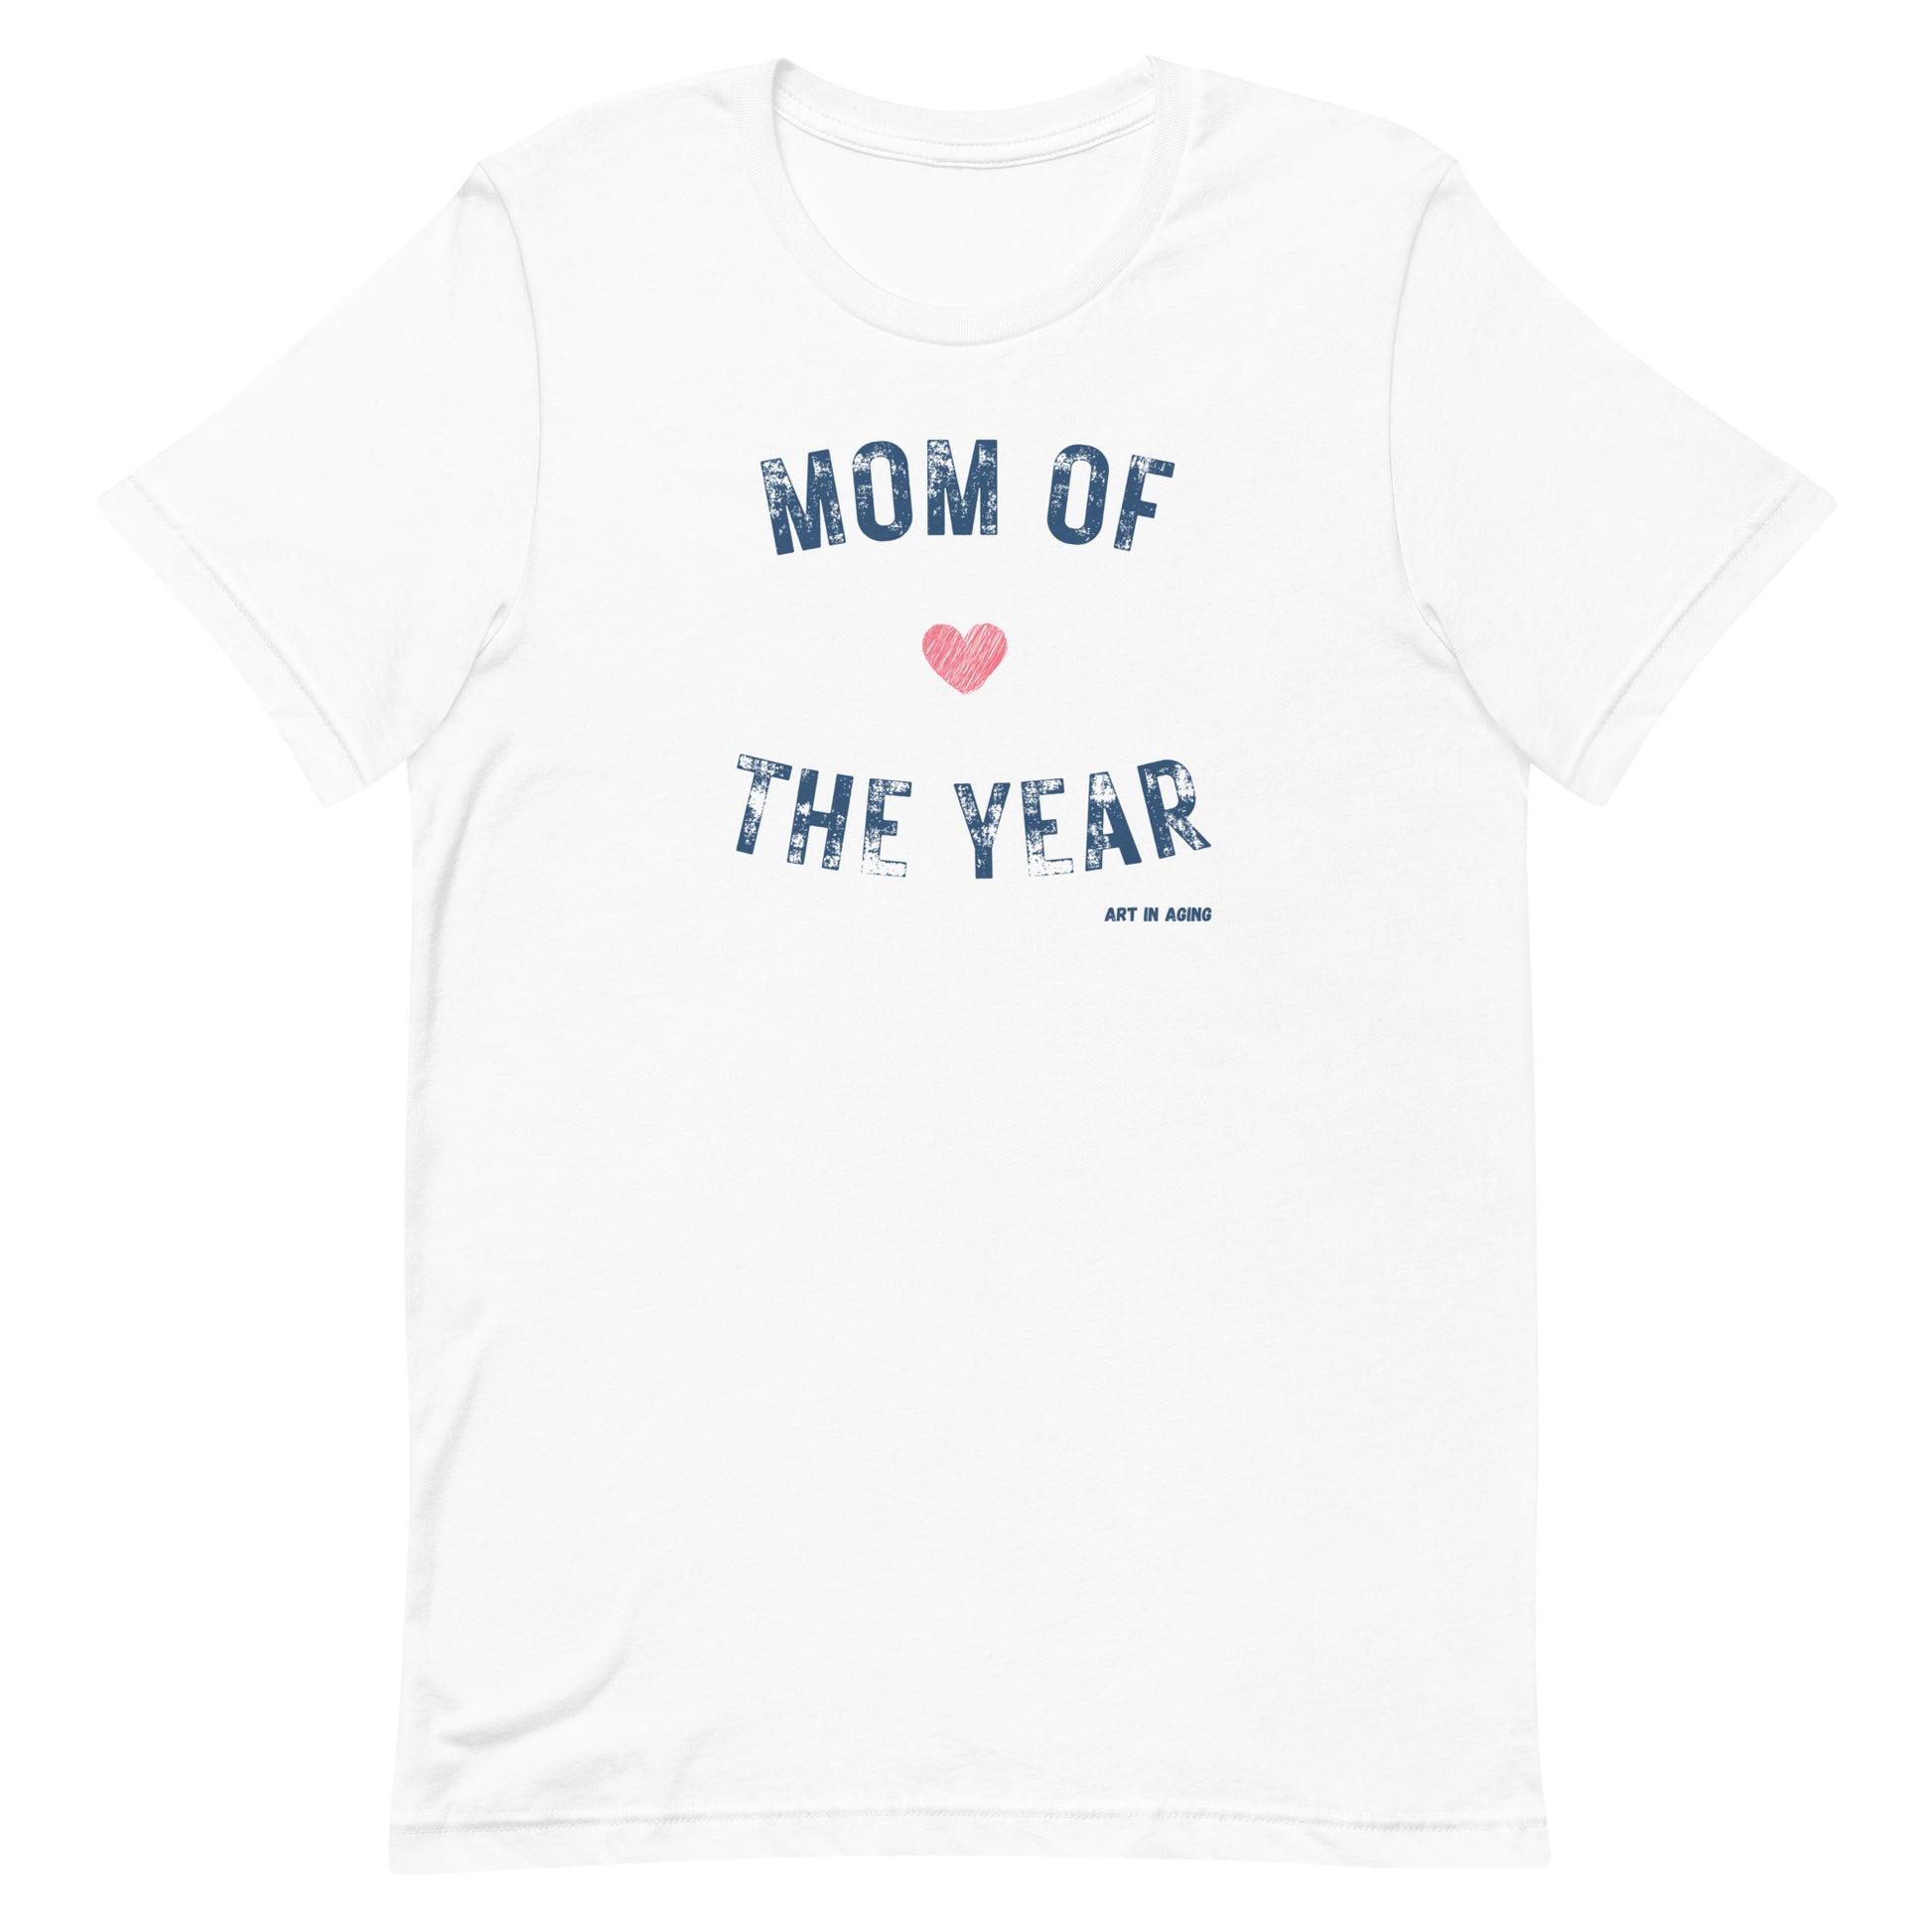 Mom of the Year Tee | Art in Aging